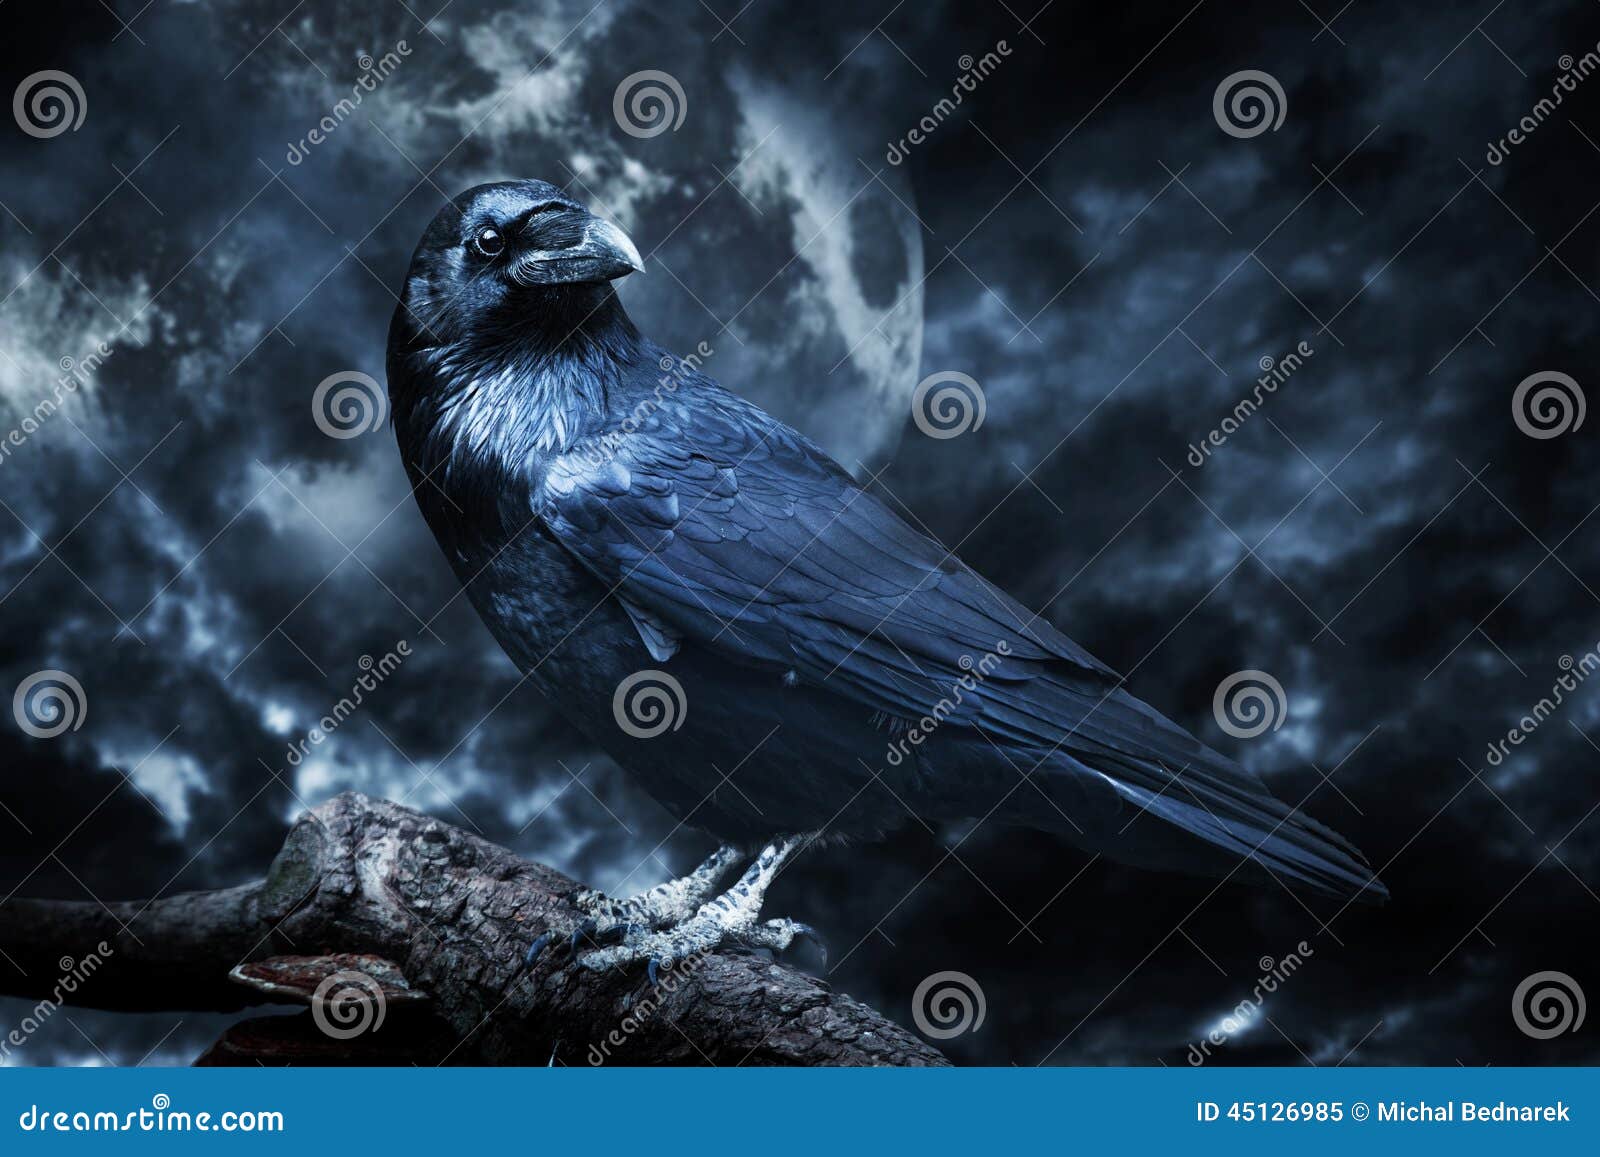 black raven in moonlight perched on tree.